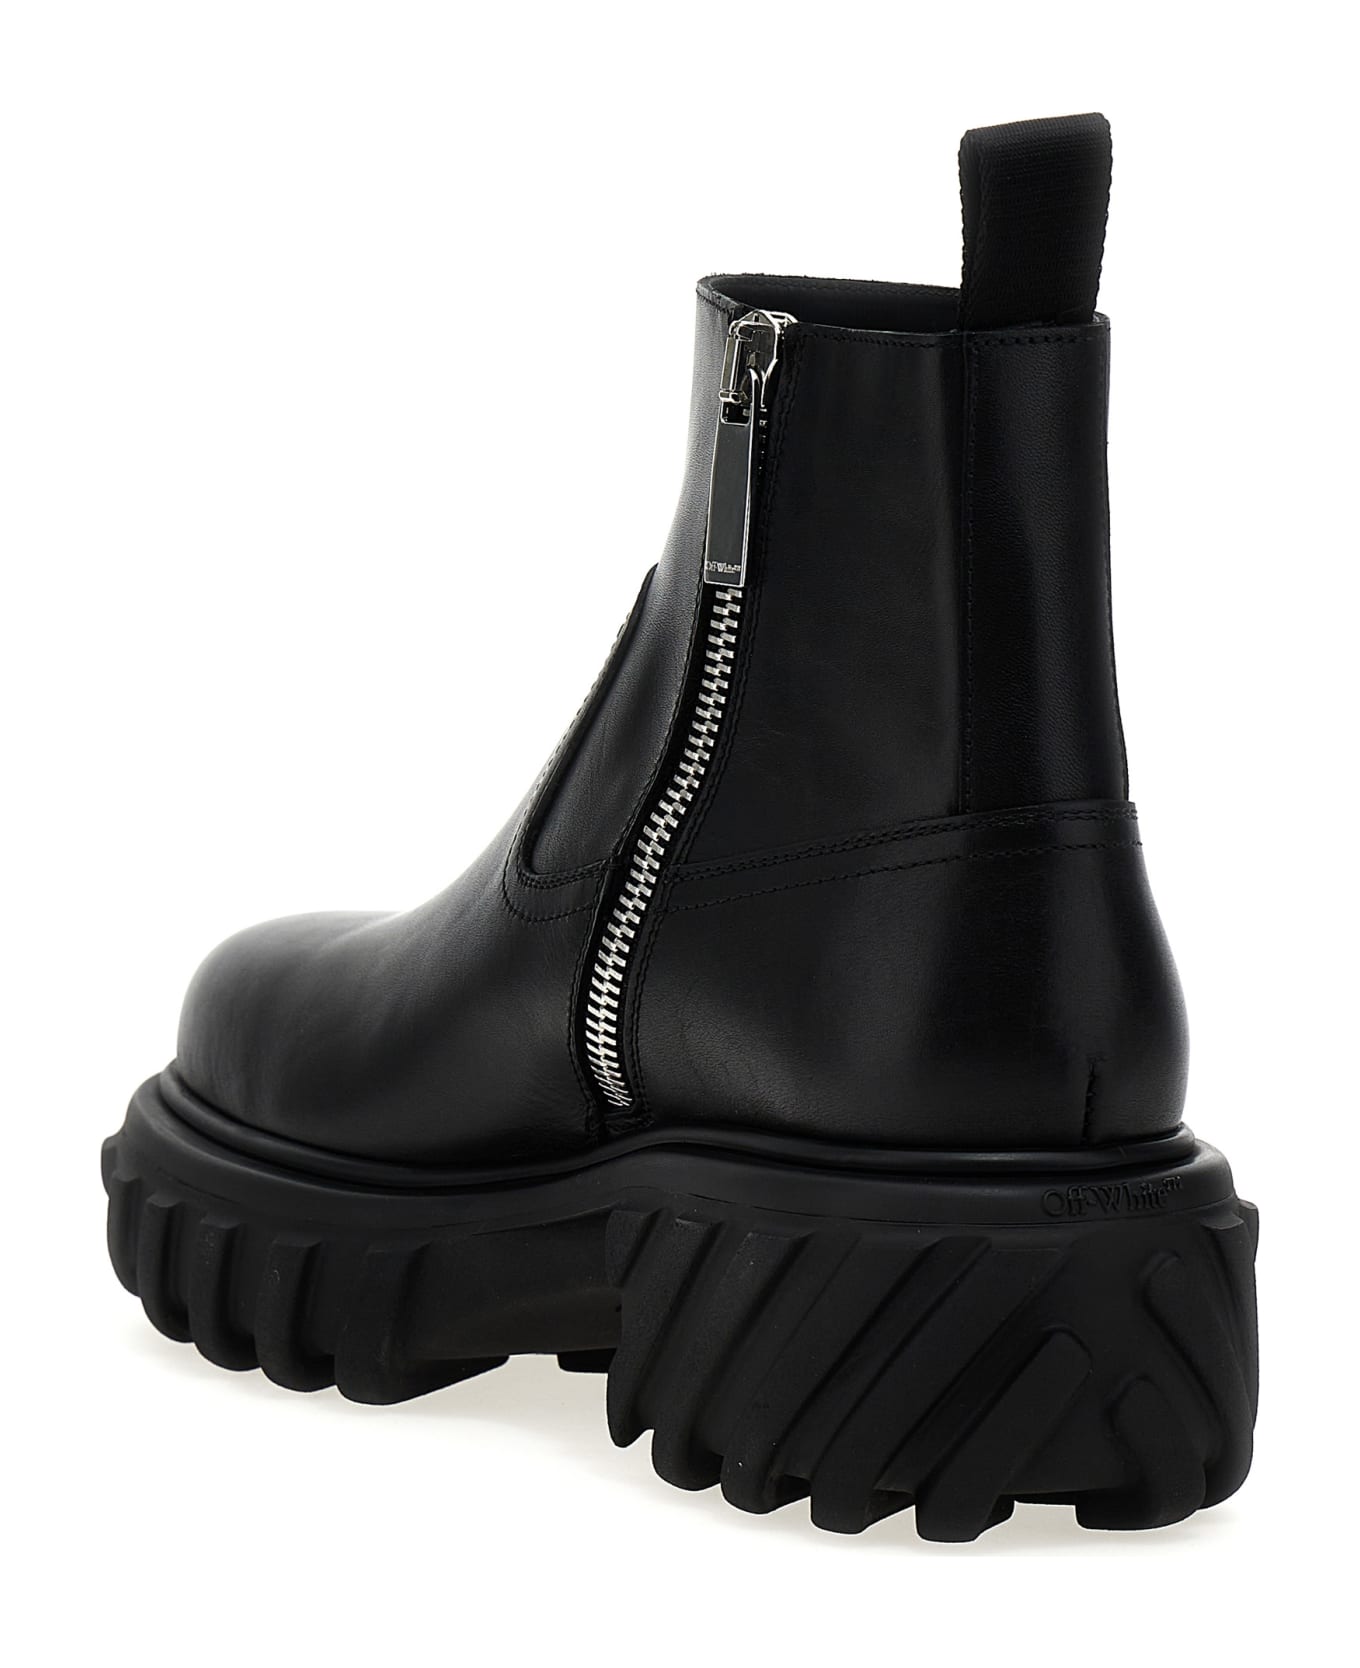 Off-White 'tractor Motor' Ankle Boots - Black  